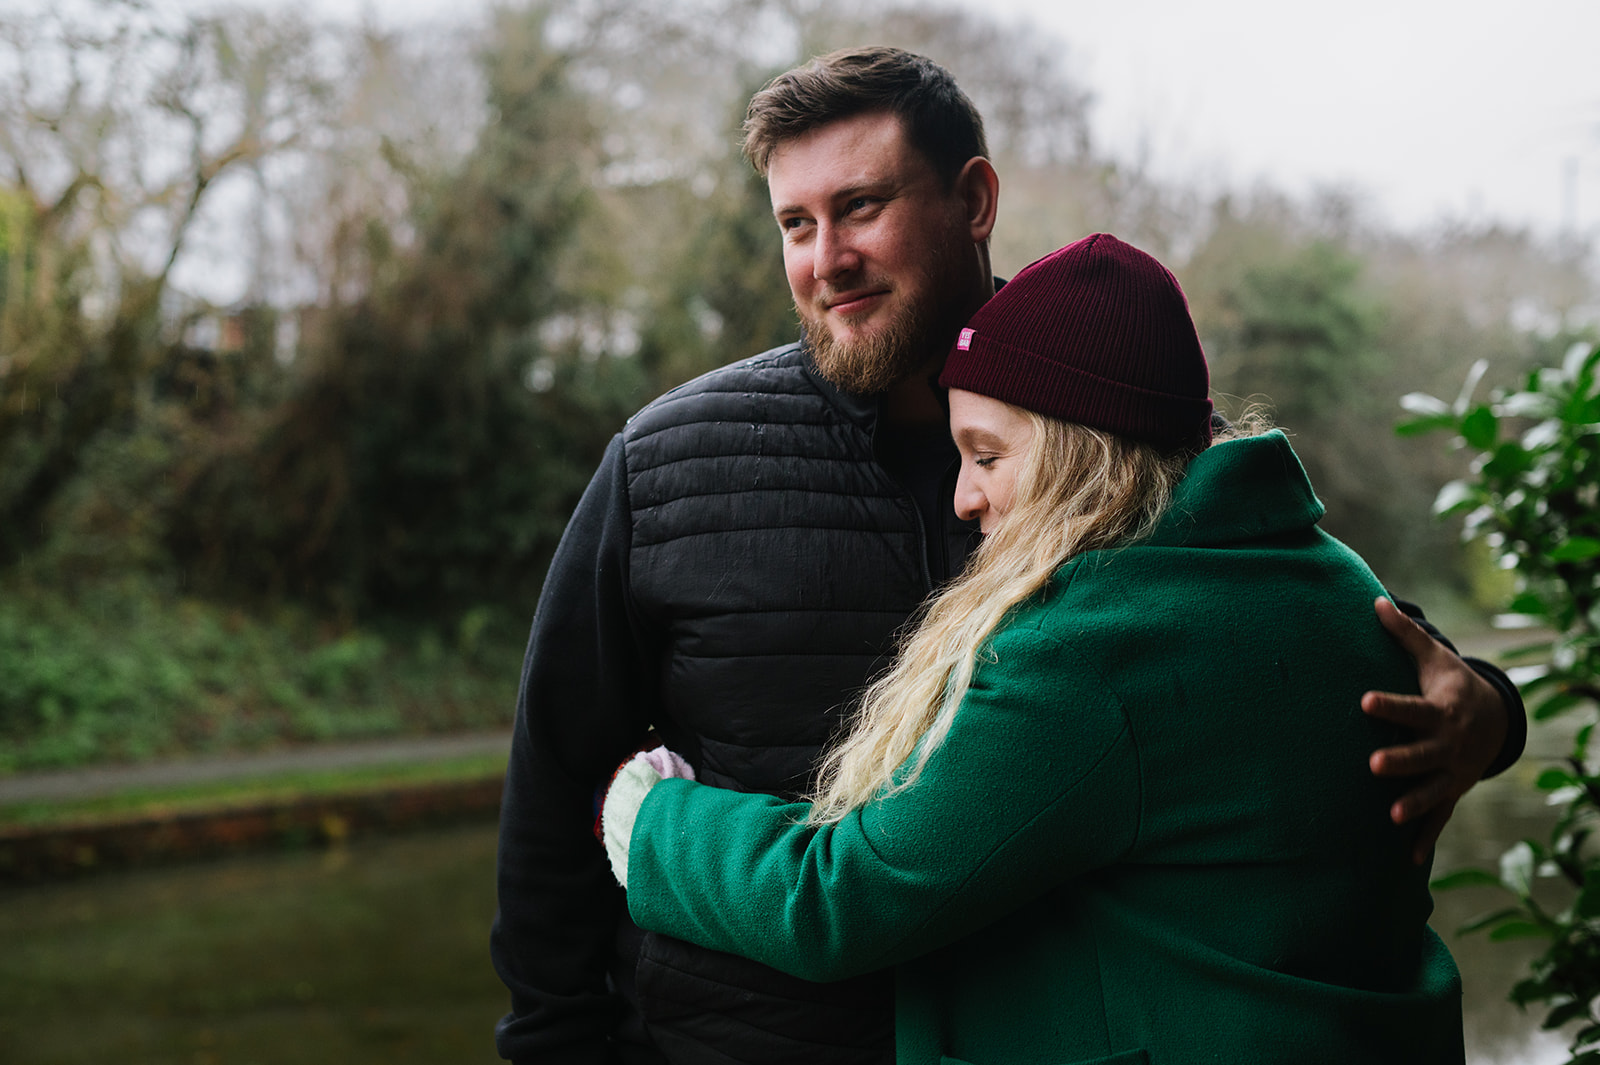 winter engagement photos by the canal in Walsall